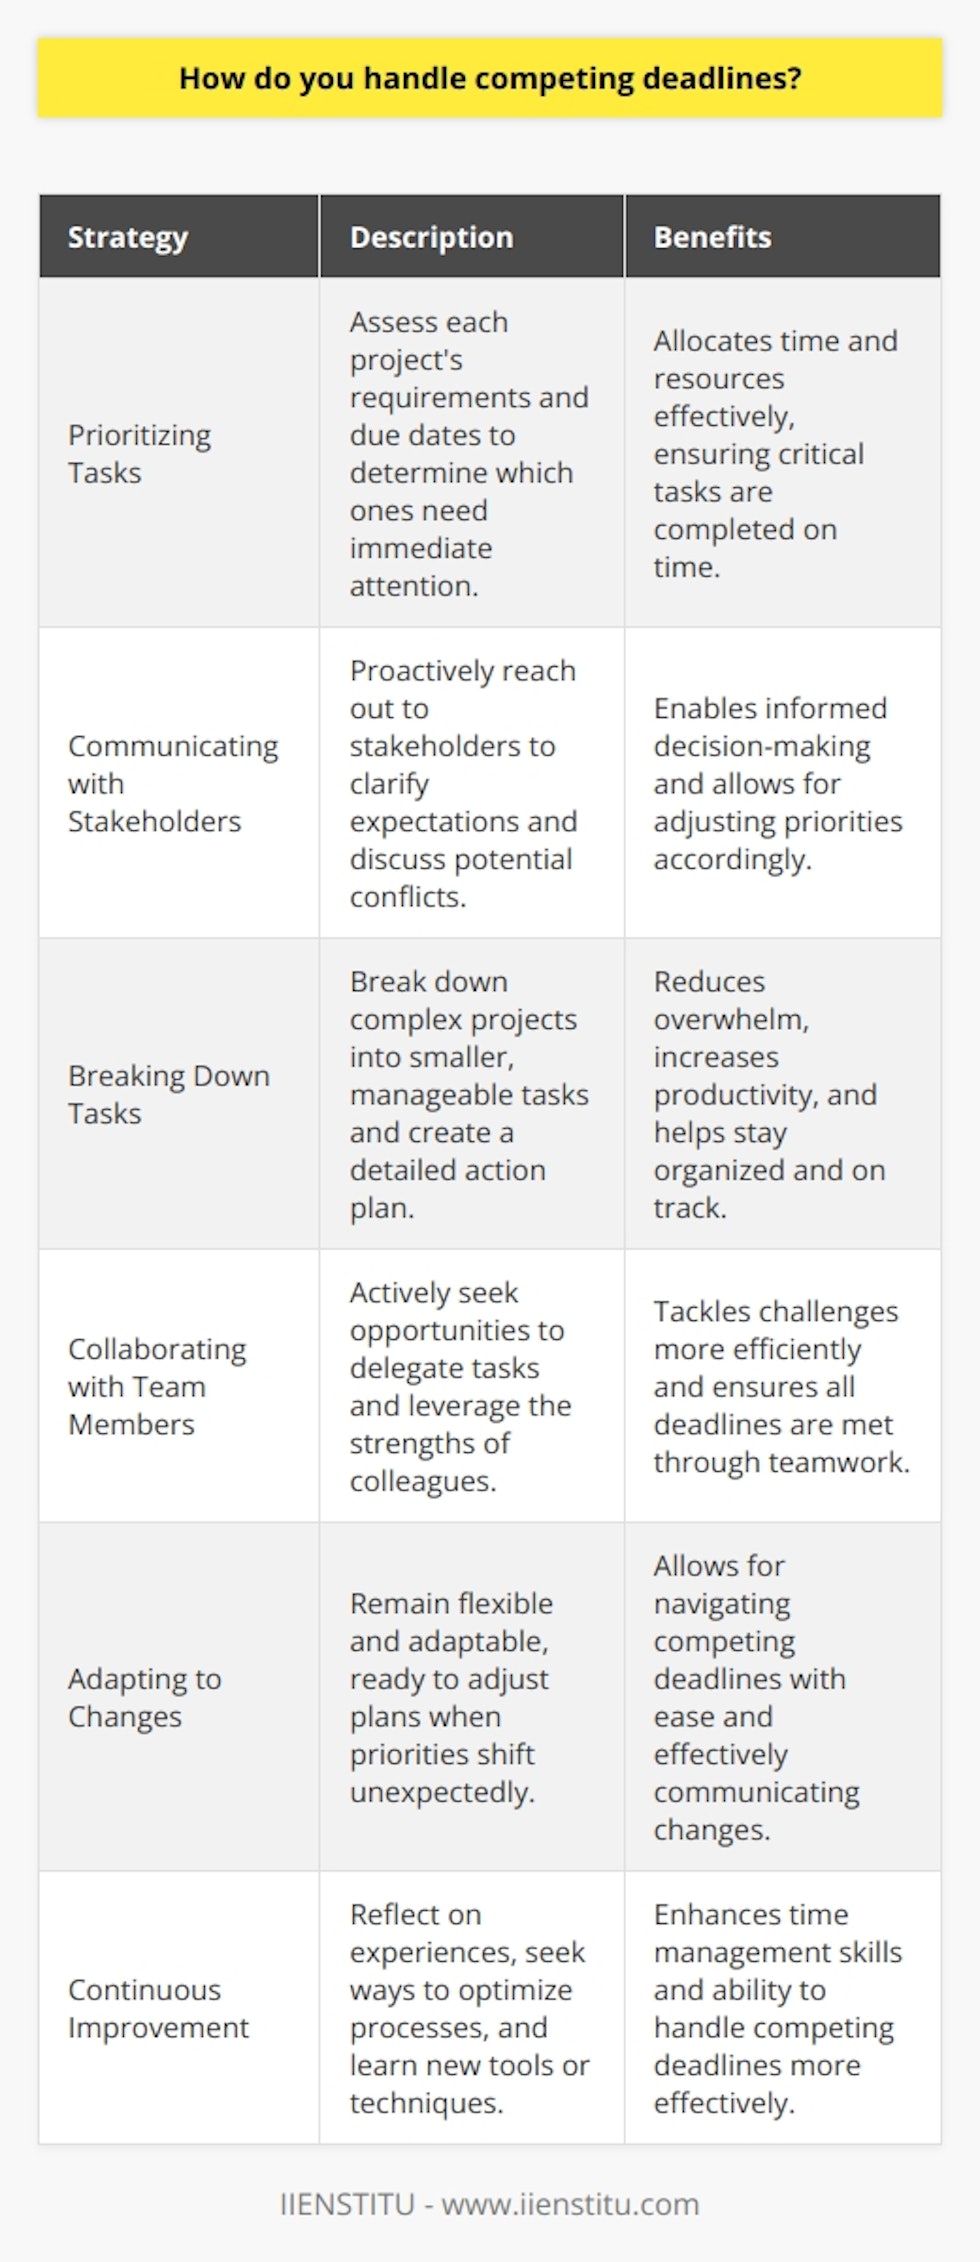 Prioritizing Tasks When faced with competing deadlines, I prioritize tasks based on their urgency and importance. I assess each projects requirements and due dates to determine which ones need immediate attention. This helps me allocate my time and resources effectively, ensuring that critical tasks are completed on time. Communicating with Stakeholders Open communication is key to managing competing deadlines. I proactively reach out to stakeholders, such as clients or managers, to clarify expectations and discuss any potential conflicts. By keeping everyone informed and seeking guidance when needed, I can make informed decisions and adjust my priorities accordingly. Breaking Down Tasks When juggling multiple deadlines, I break down complex projects into smaller, manageable tasks. This approach allows me to focus on one step at a time, reducing overwhelm and increasing productivity. I create a detailed action plan with specific milestones and timelines, which helps me stay organized and on track. Collaborating with Team Members Collaborating with team members is crucial when dealing with competing deadlines. I actively seek opportunities to delegate tasks and leverage the strengths of my colleagues. By working together and supporting each other, we can tackle challenges more efficiently and ensure that all deadlines are met. Adapting to Changes In fast-paced work environments, priorities can shift unexpectedly. I remain flexible and adaptable, ready to adjust my plans when necessary. If a new urgent task arises, I quickly reassess my priorities and communicate any changes to the relevant parties. Being agile allows me to navigate competing deadlines with ease. Continuous Improvement I believe in continuously improving my time management skills. I reflect on my experiences, seeking ways to optimize my processes and become more efficient. Whether its learning new tools or refining my prioritization techniques, Im always looking for opportunities to grow and handle competing deadlines more effectively.